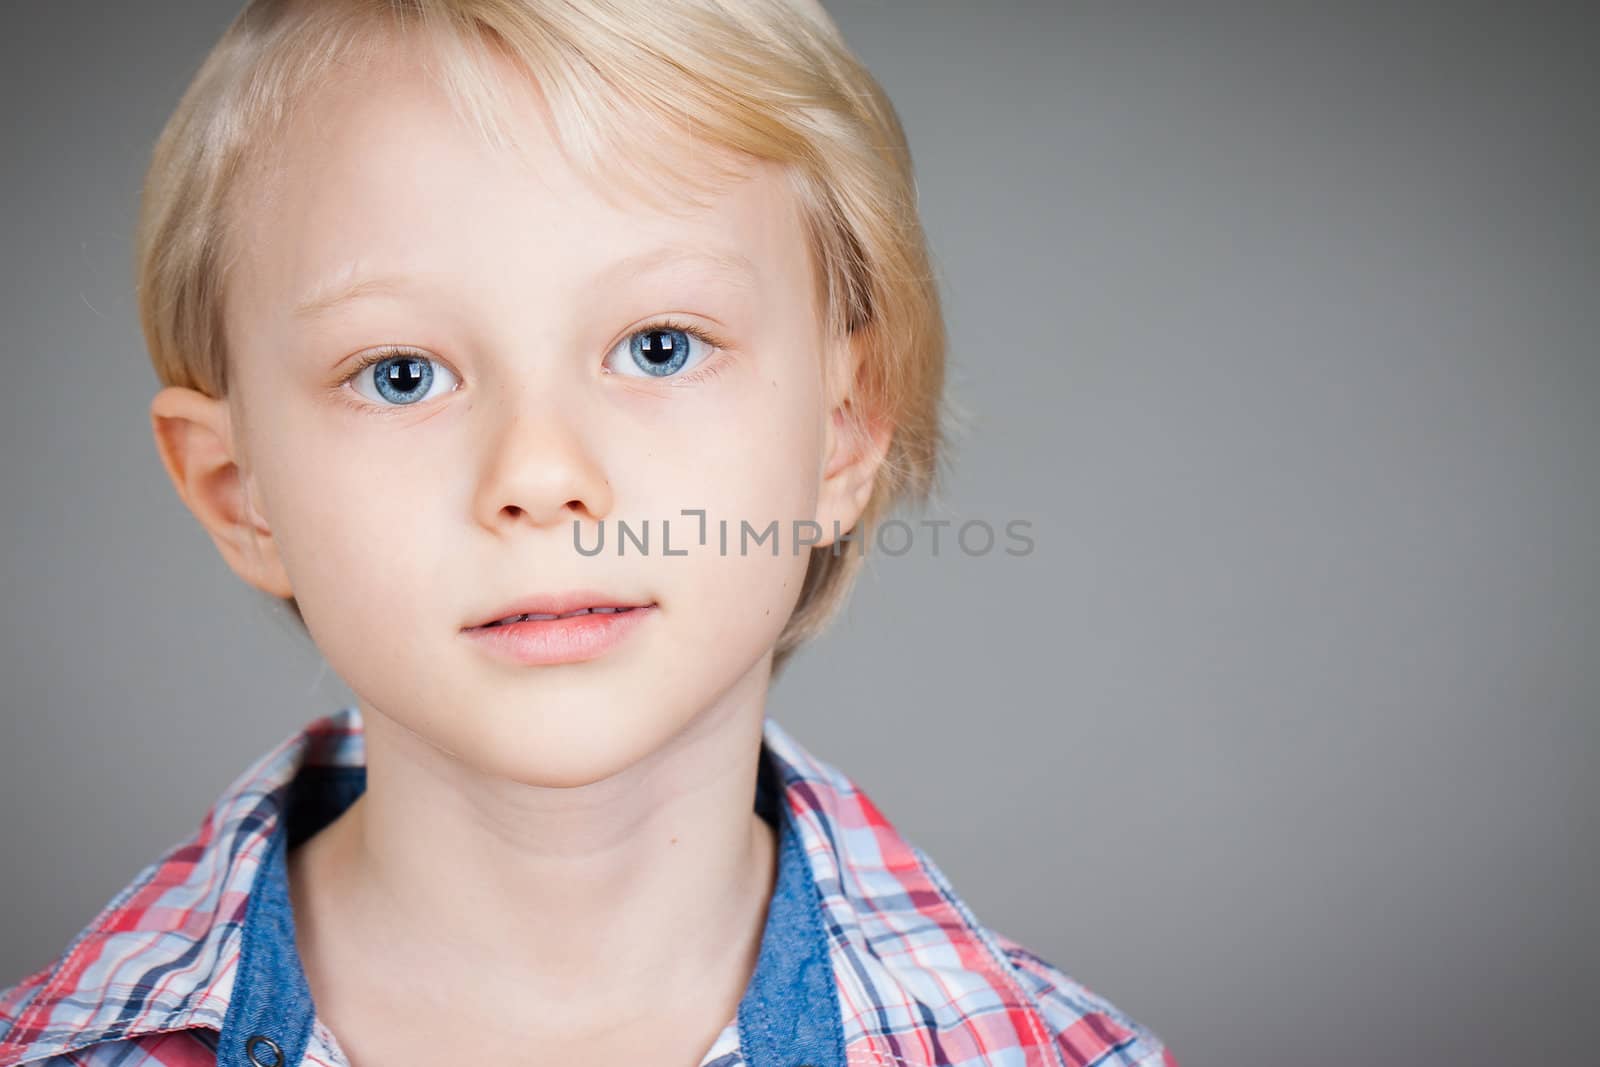 A close-up portrait of a serious young boy looking at camera.